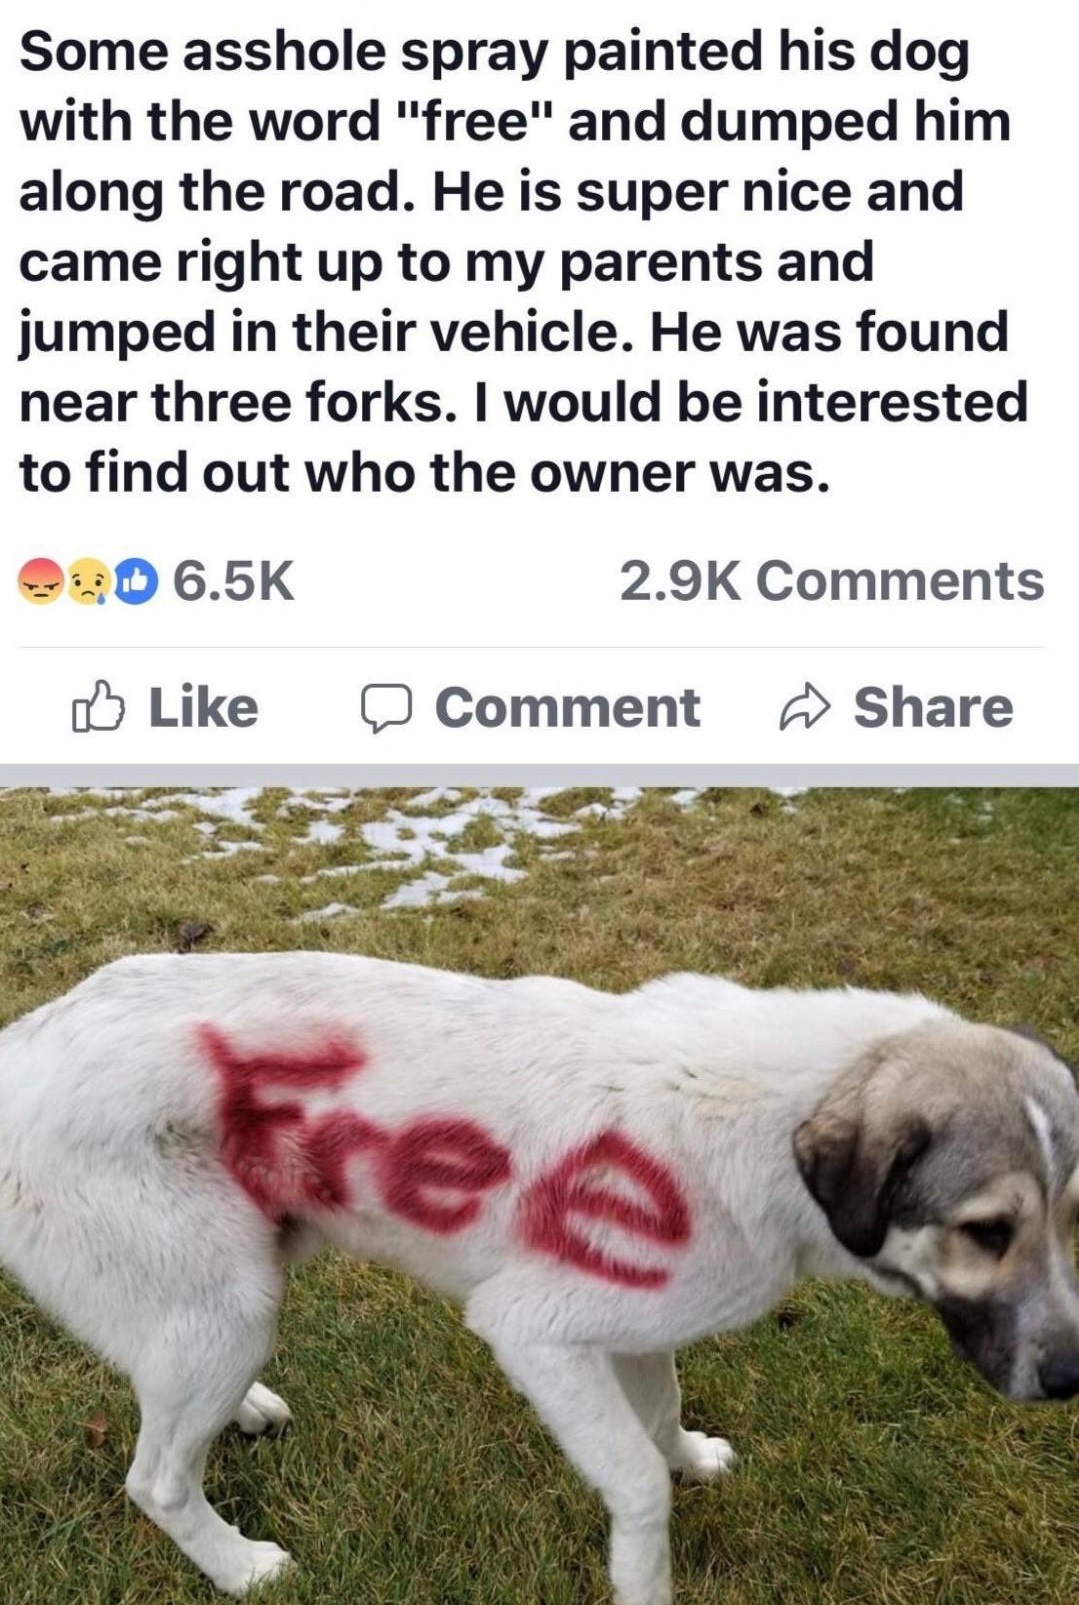 photo caption - Some asshole spray painted his dog with the word "free" and dumped him along the road. He is super nice and came right up to my parents and jumped in their vehicle. He was found near three forks. I would be interested to find out who the o